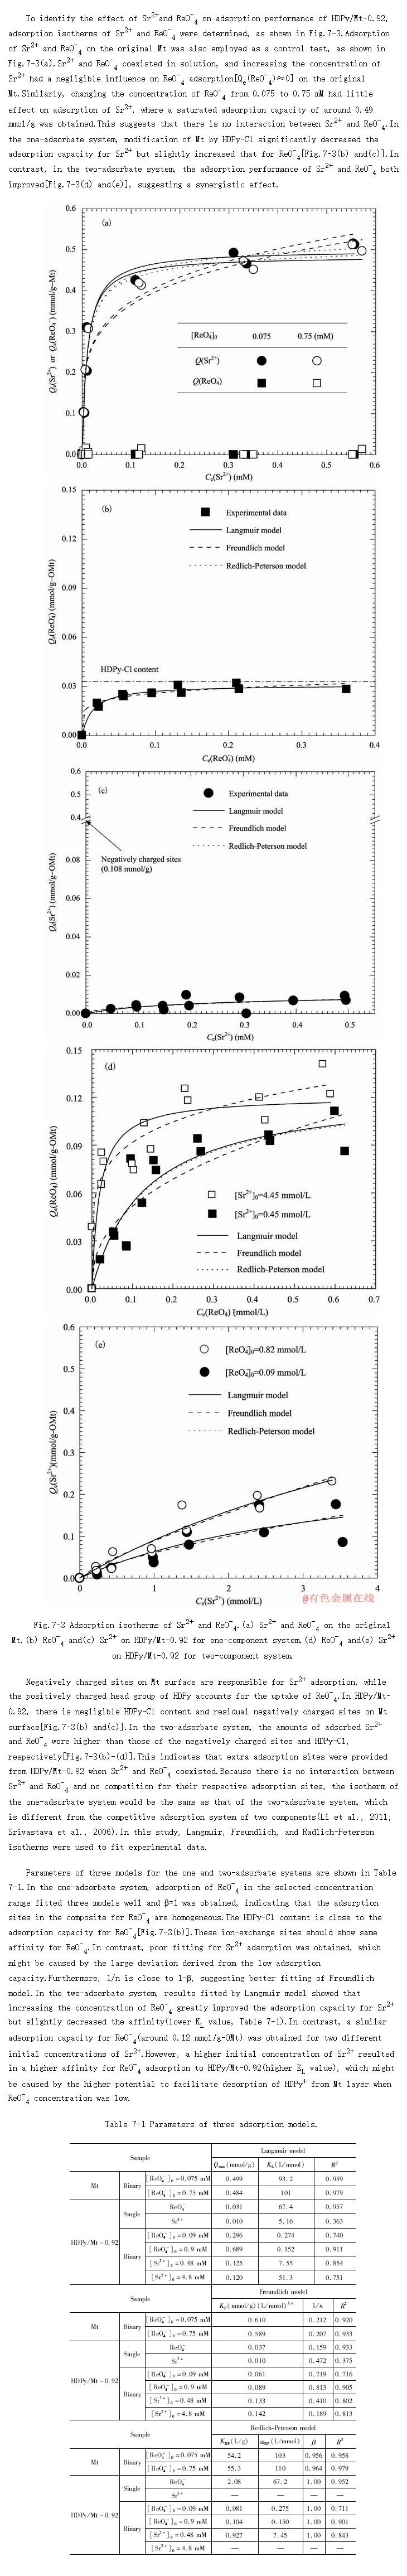 Adsorption isotherms for strontium and/or perrhenate ions on optimized modified montmorillonite